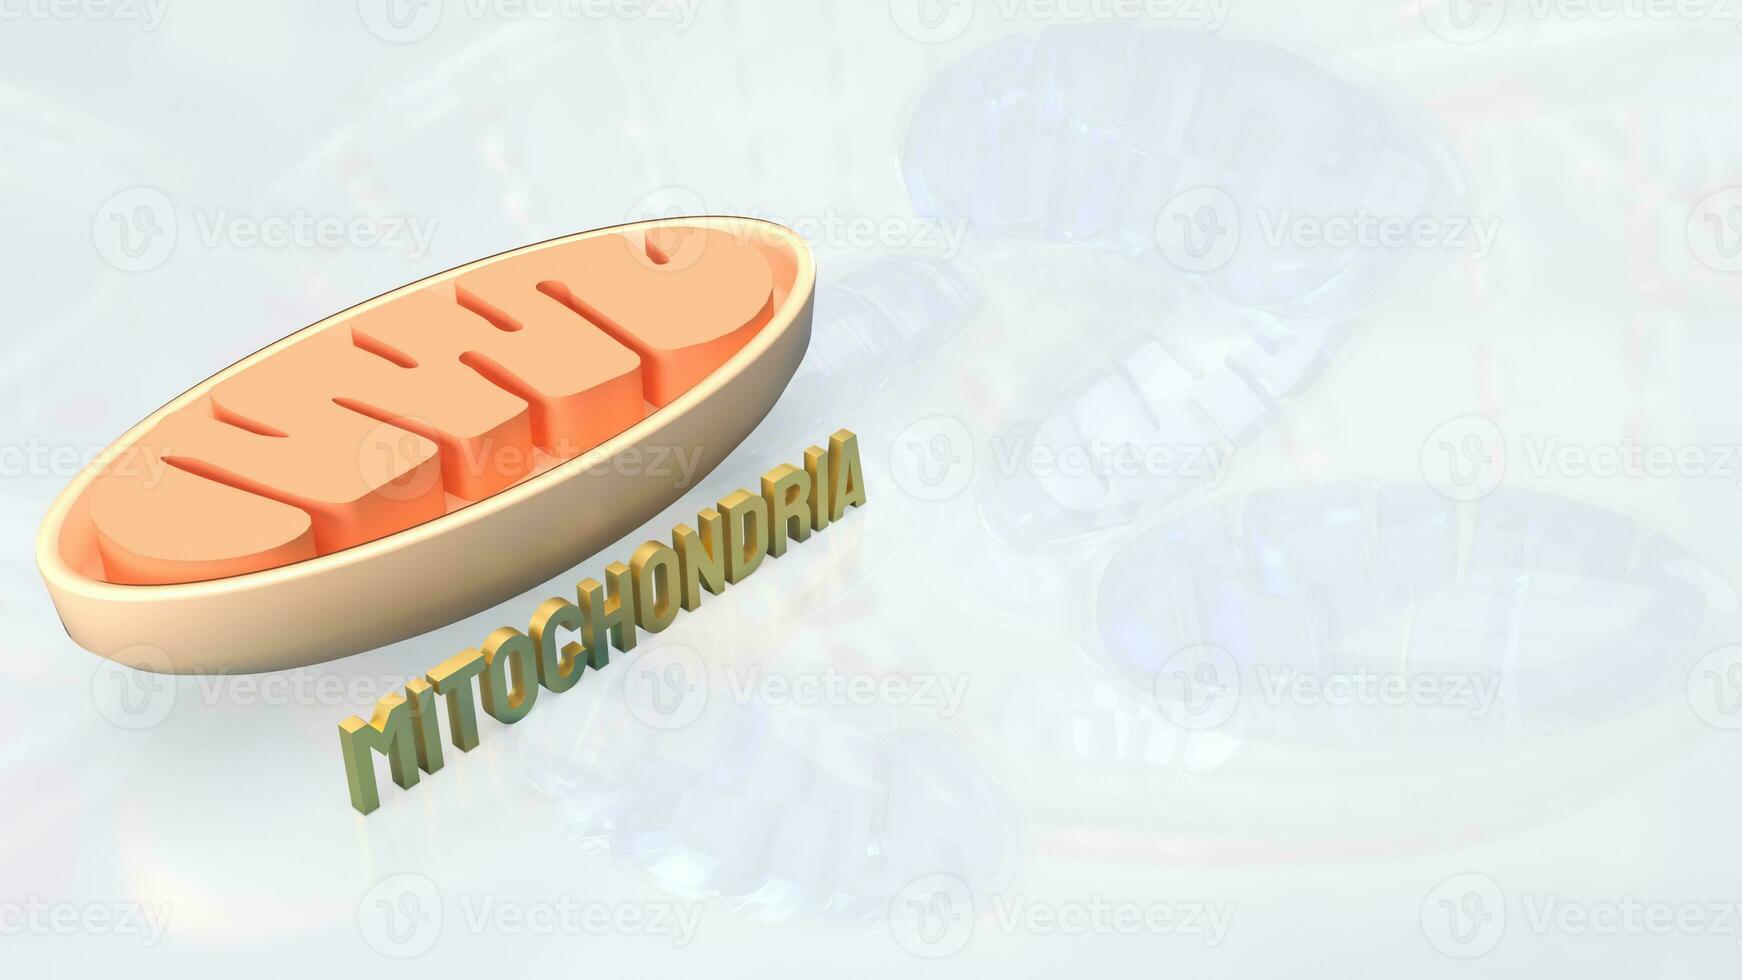 The Mitochondria for sci or health concept 3d rendering. photo